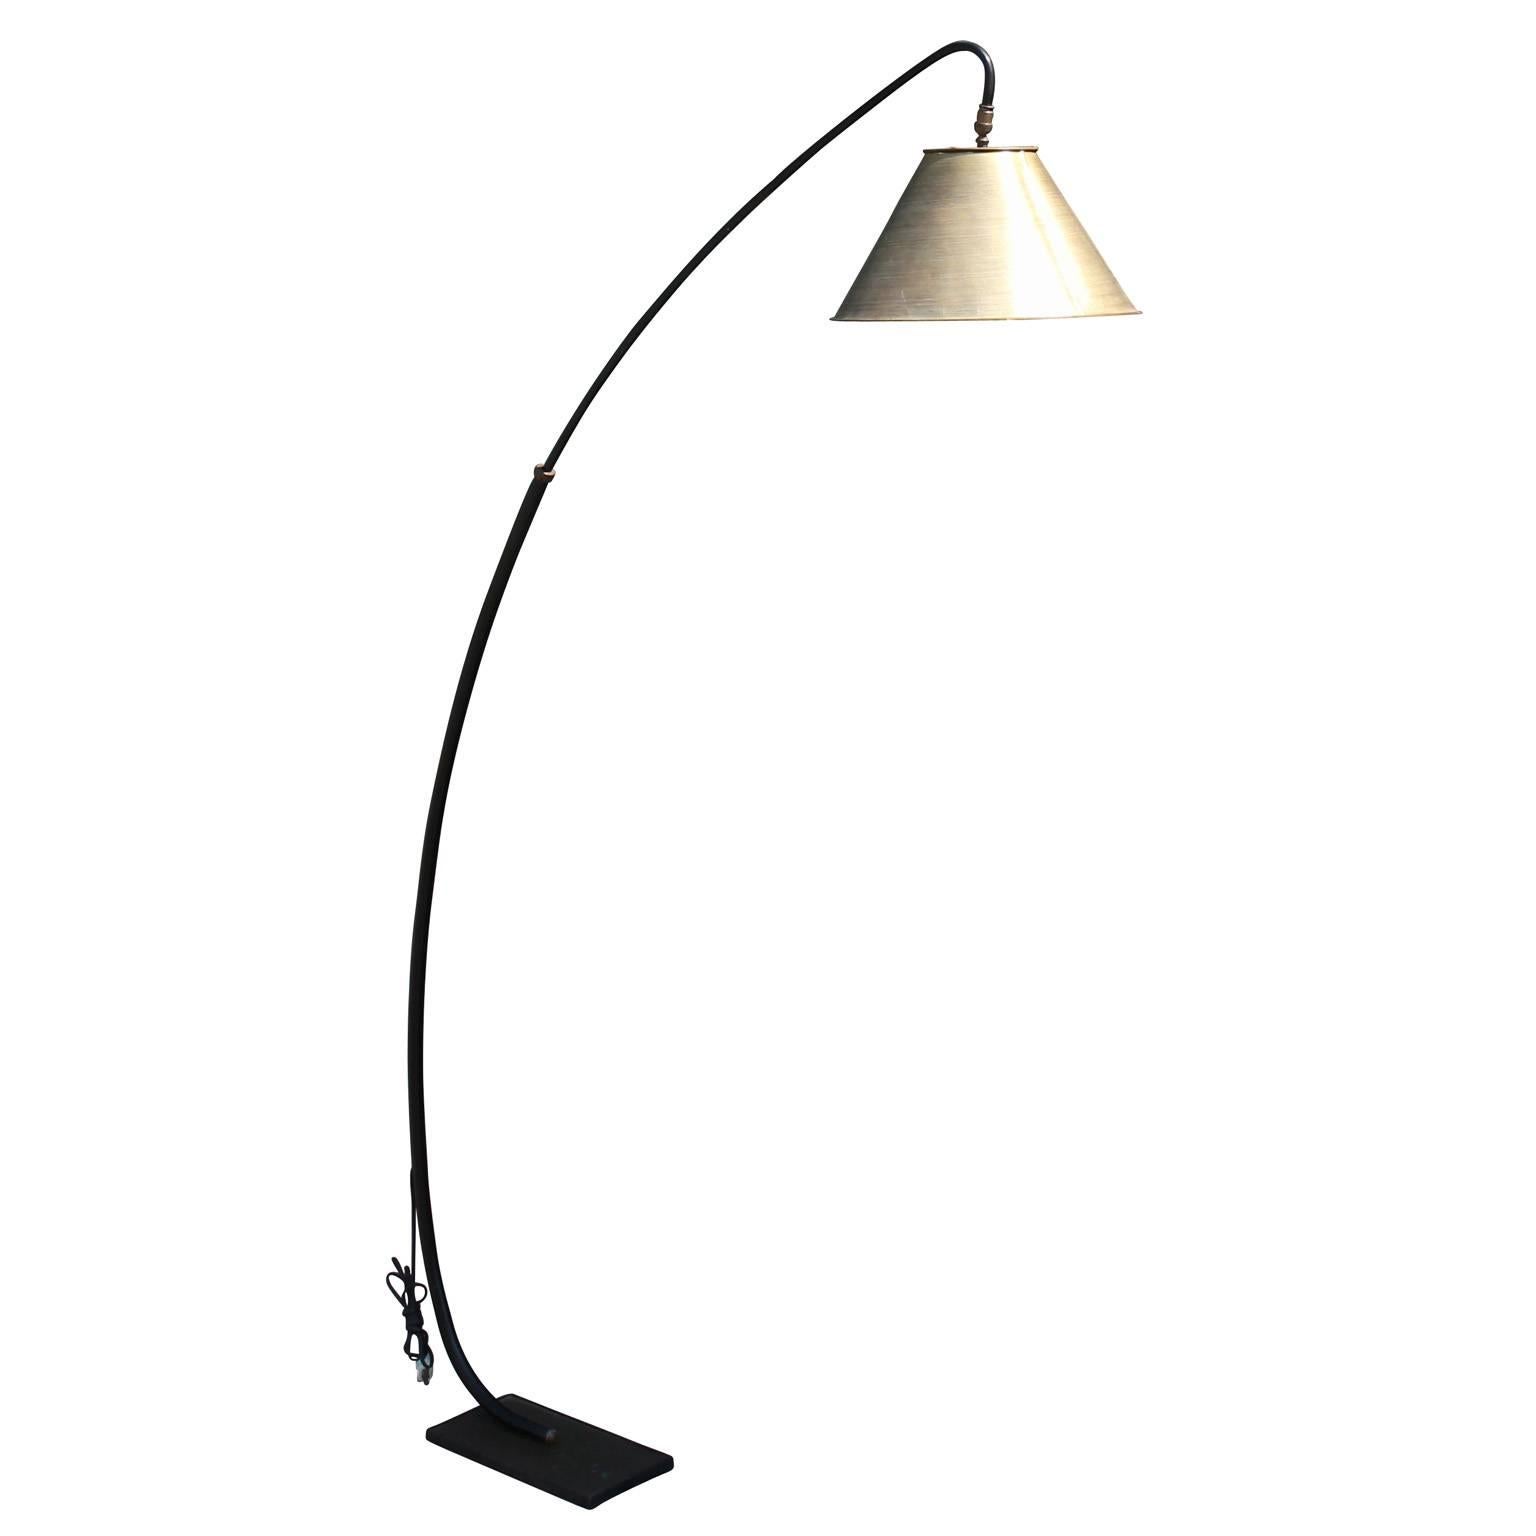 Wonderful mid-century floor lamp. Lamp is arched forward, perfect for reading. Base is a black metal and shade is faux finished with a bronze look.